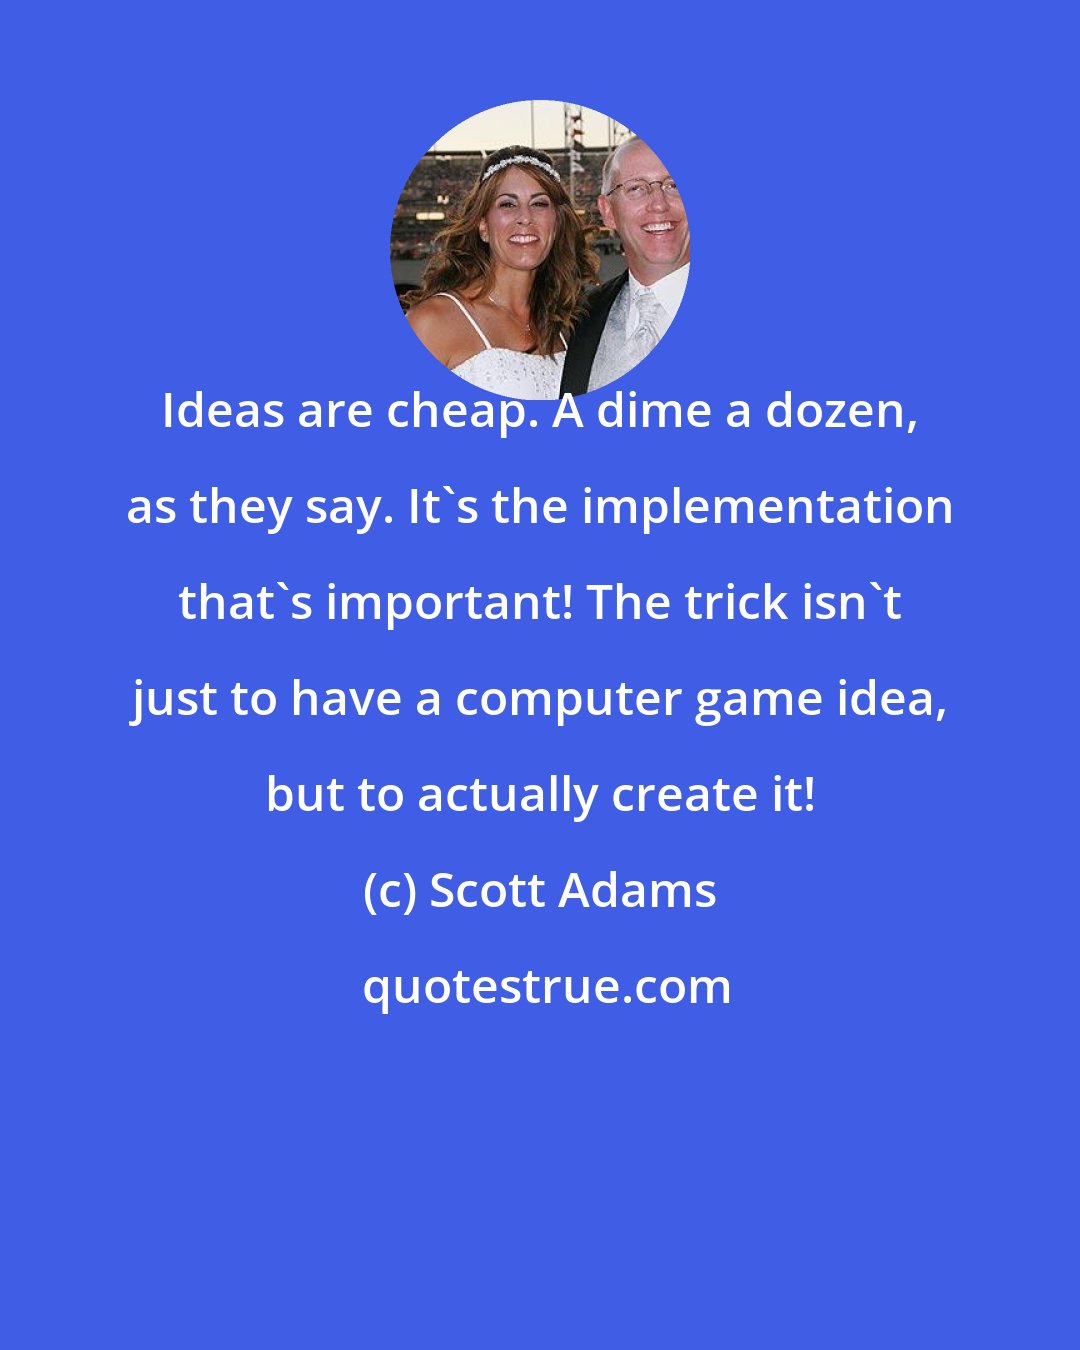 Scott Adams: Ideas are cheap. A dime a dozen, as they say. It's the implementation that's important! The trick isn't just to have a computer game idea, but to actually create it!